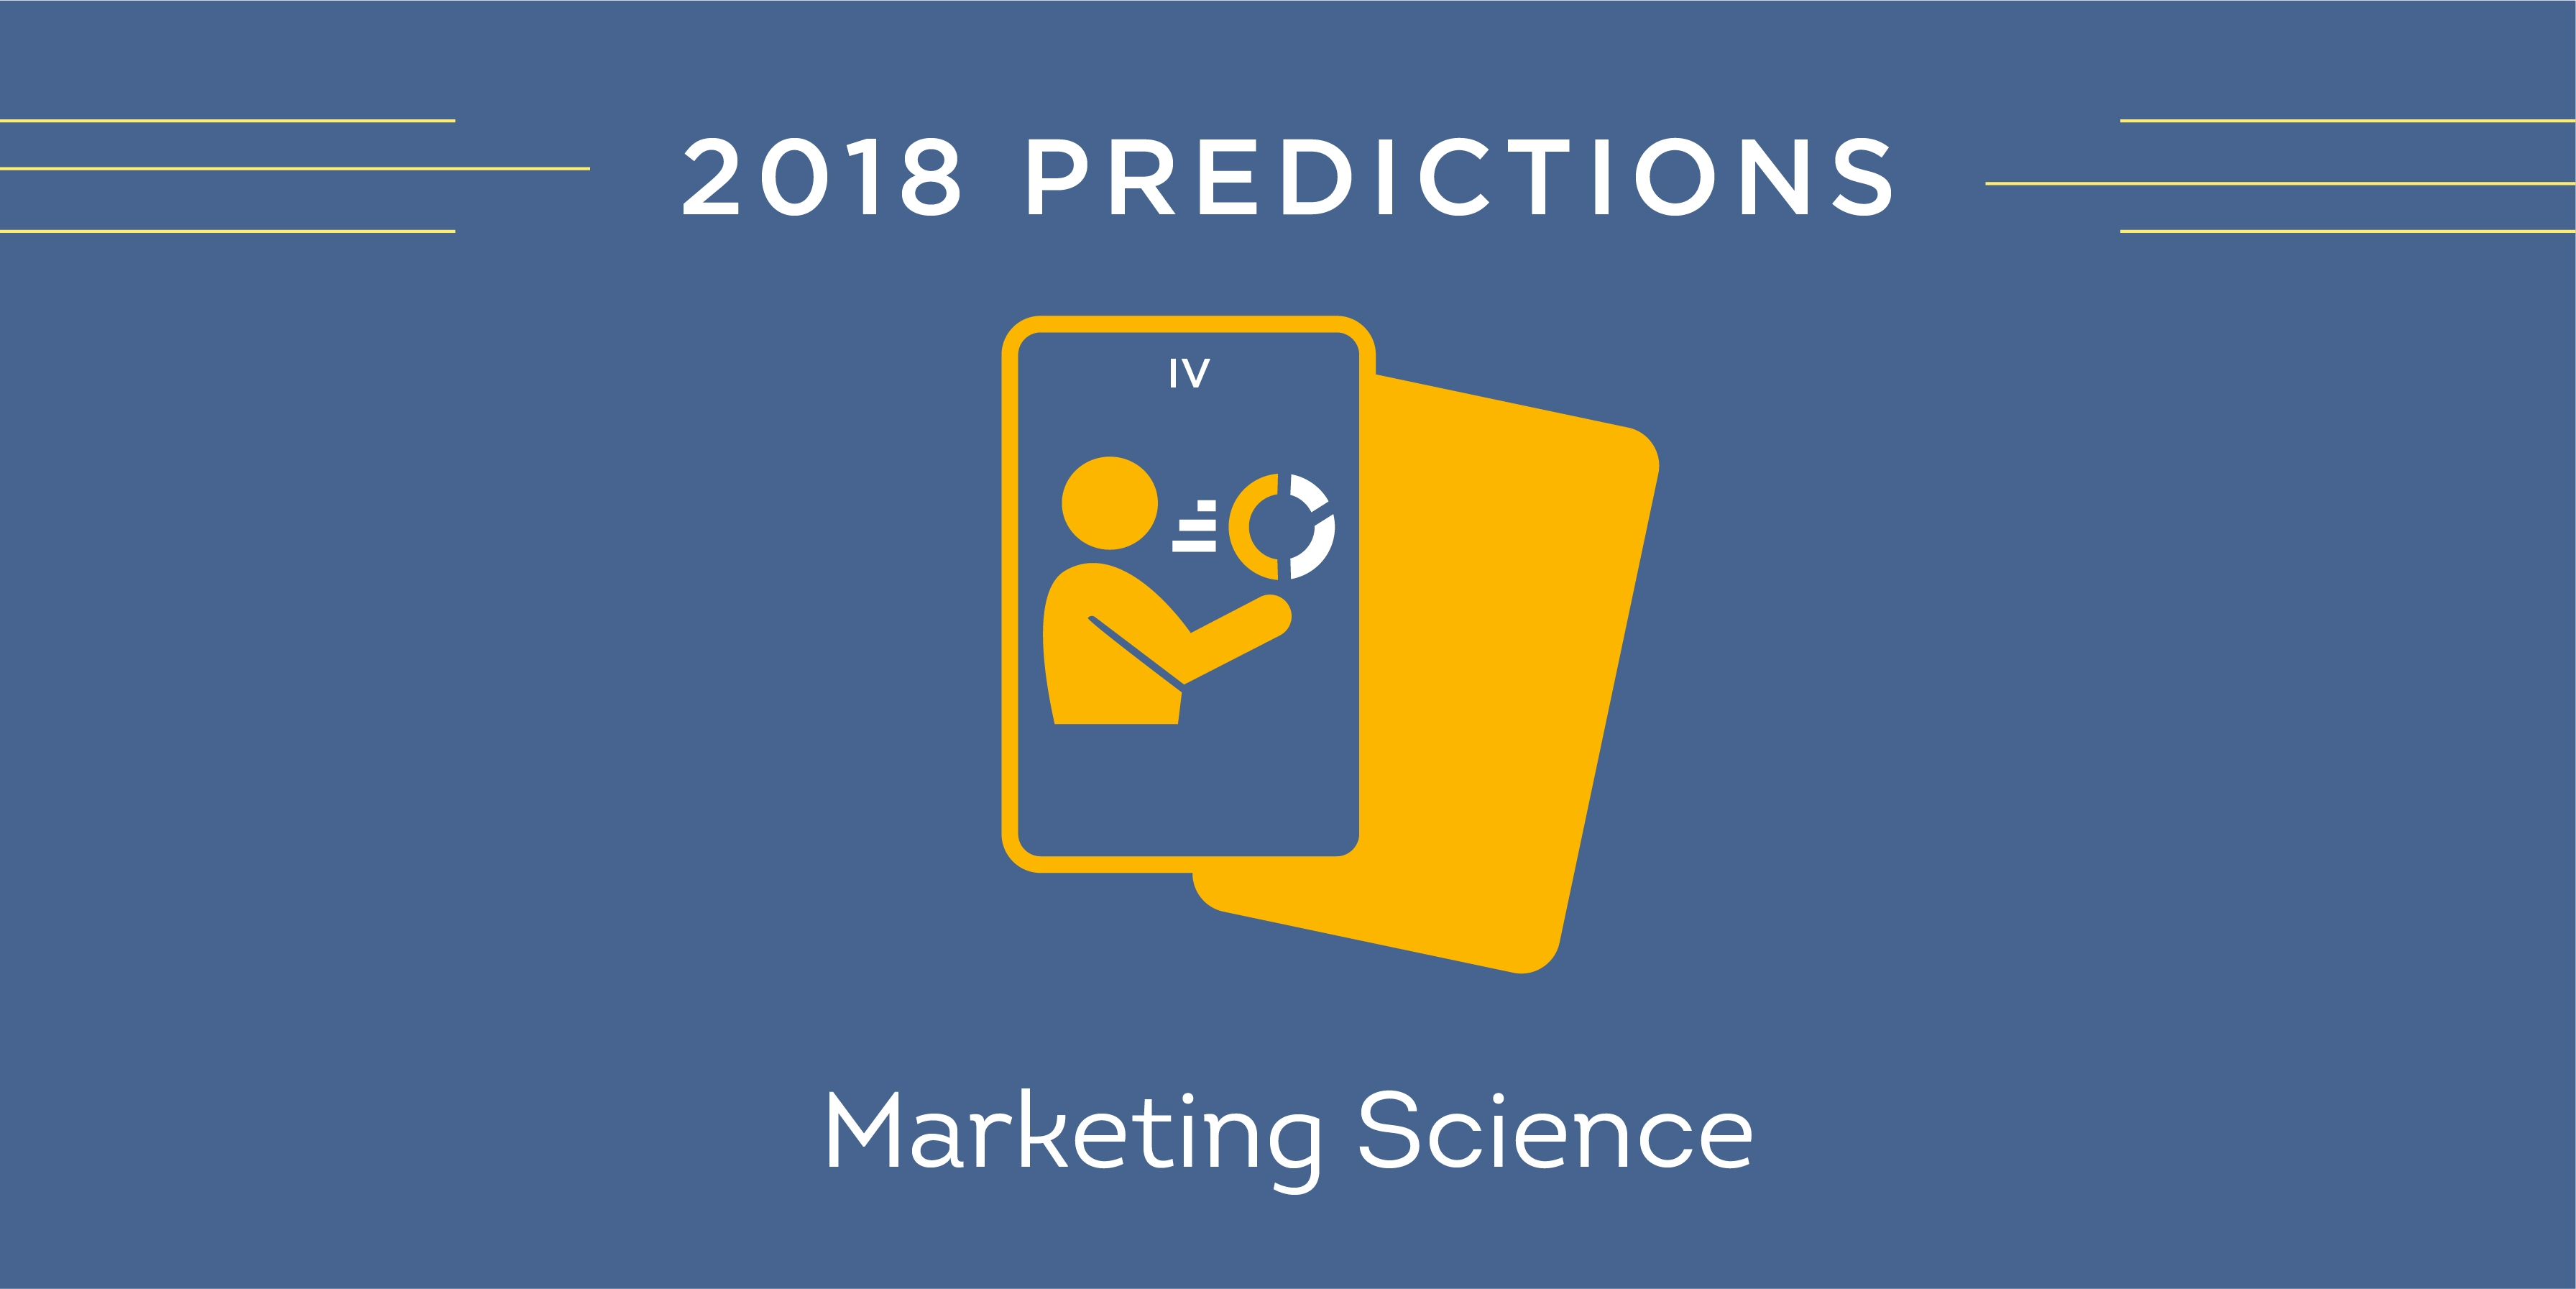 Getting More Personal, Conversational and Political: Digital Strategy Predictions for 2018